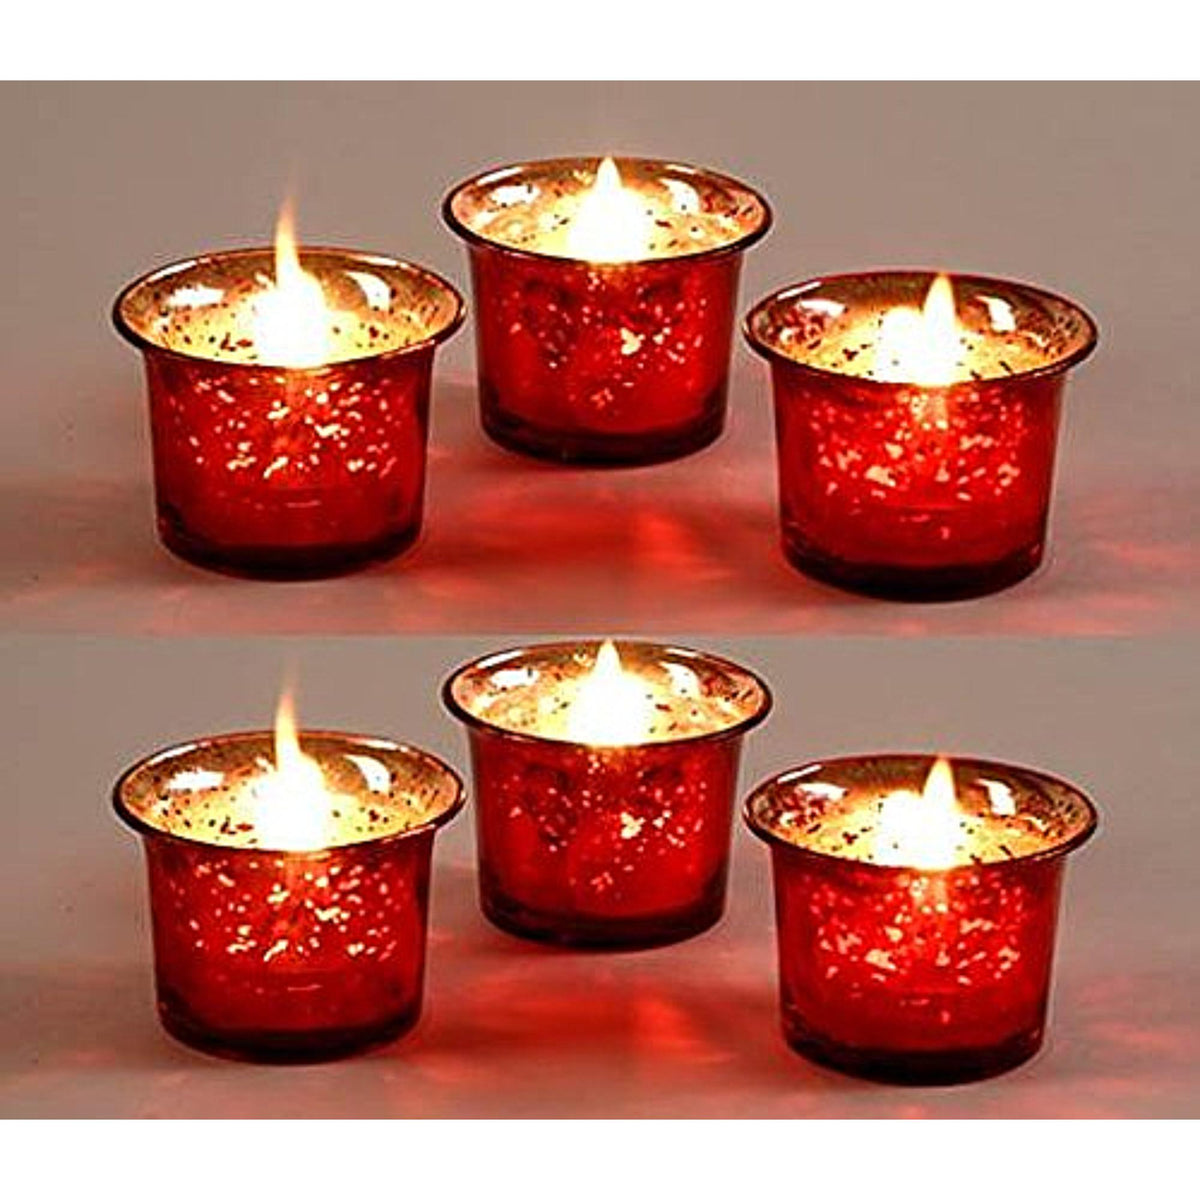 HOSLEY®   Glass Candle Tealight Holders, Metallic Red Finish, Set of 6